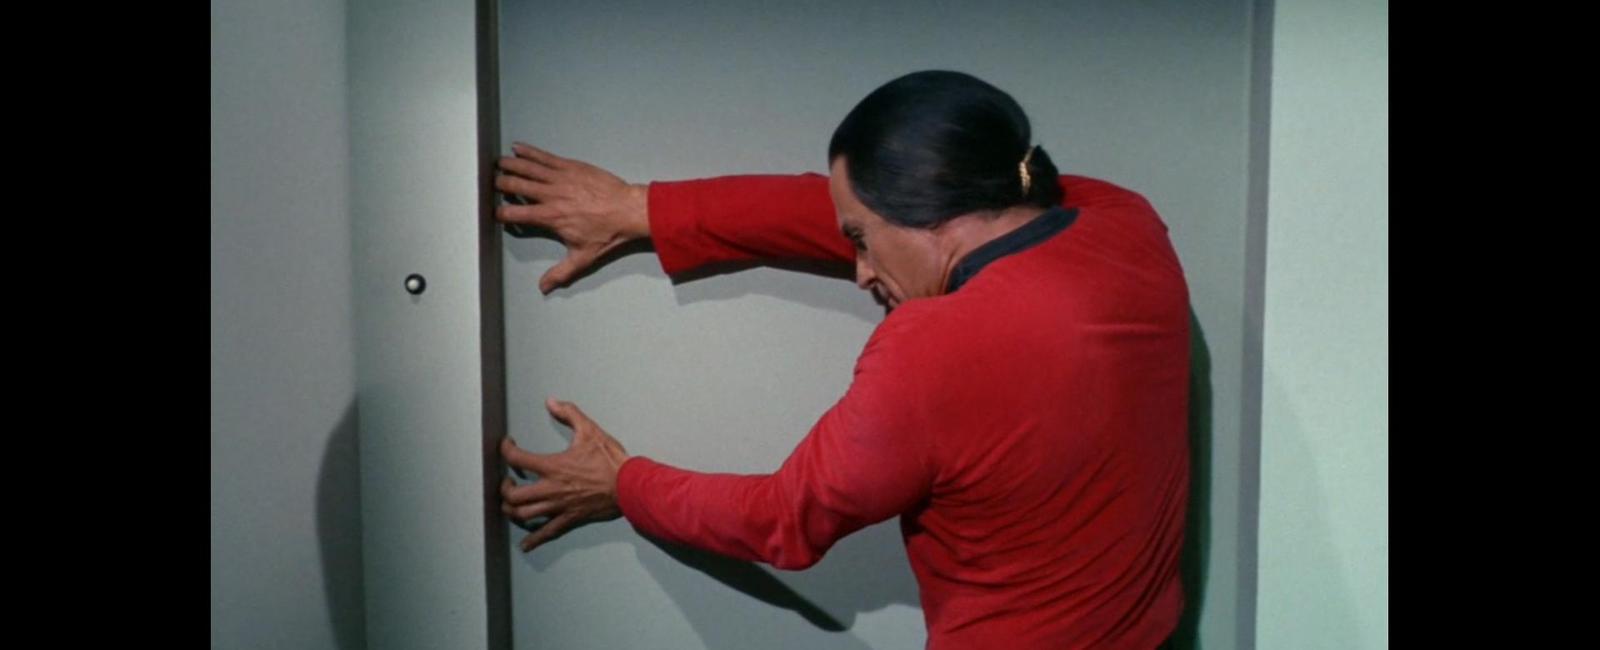 In star trek the sound of the automatic doors opening on the u s s enterprise is a russian train s toilet flushing